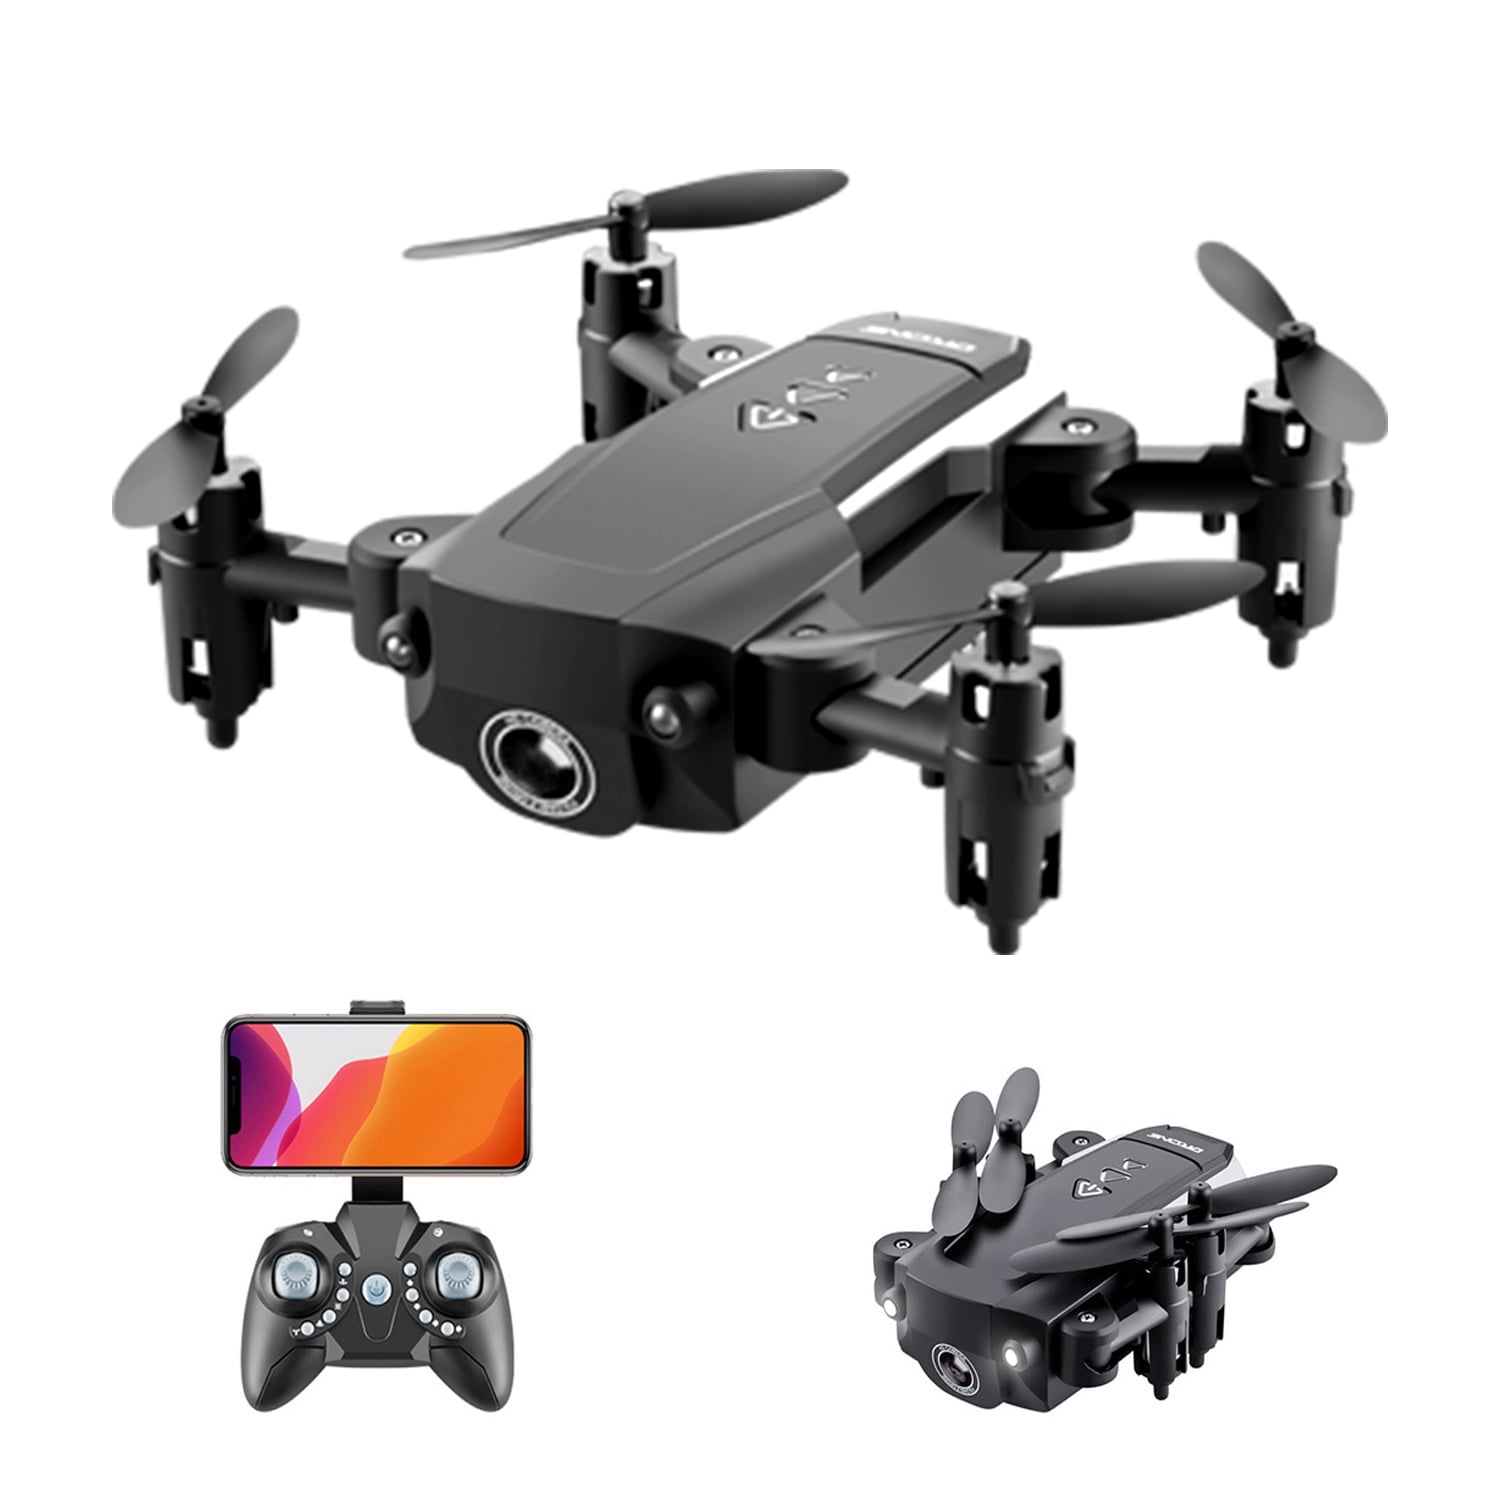 Mini Drones for Kids and Beginners,Helicopter with Remote Control,RC Pocket Quadcopter Drone with Altitude Hold Function,360??Flips and One Key Return Drone Toys for Boys and Girls 